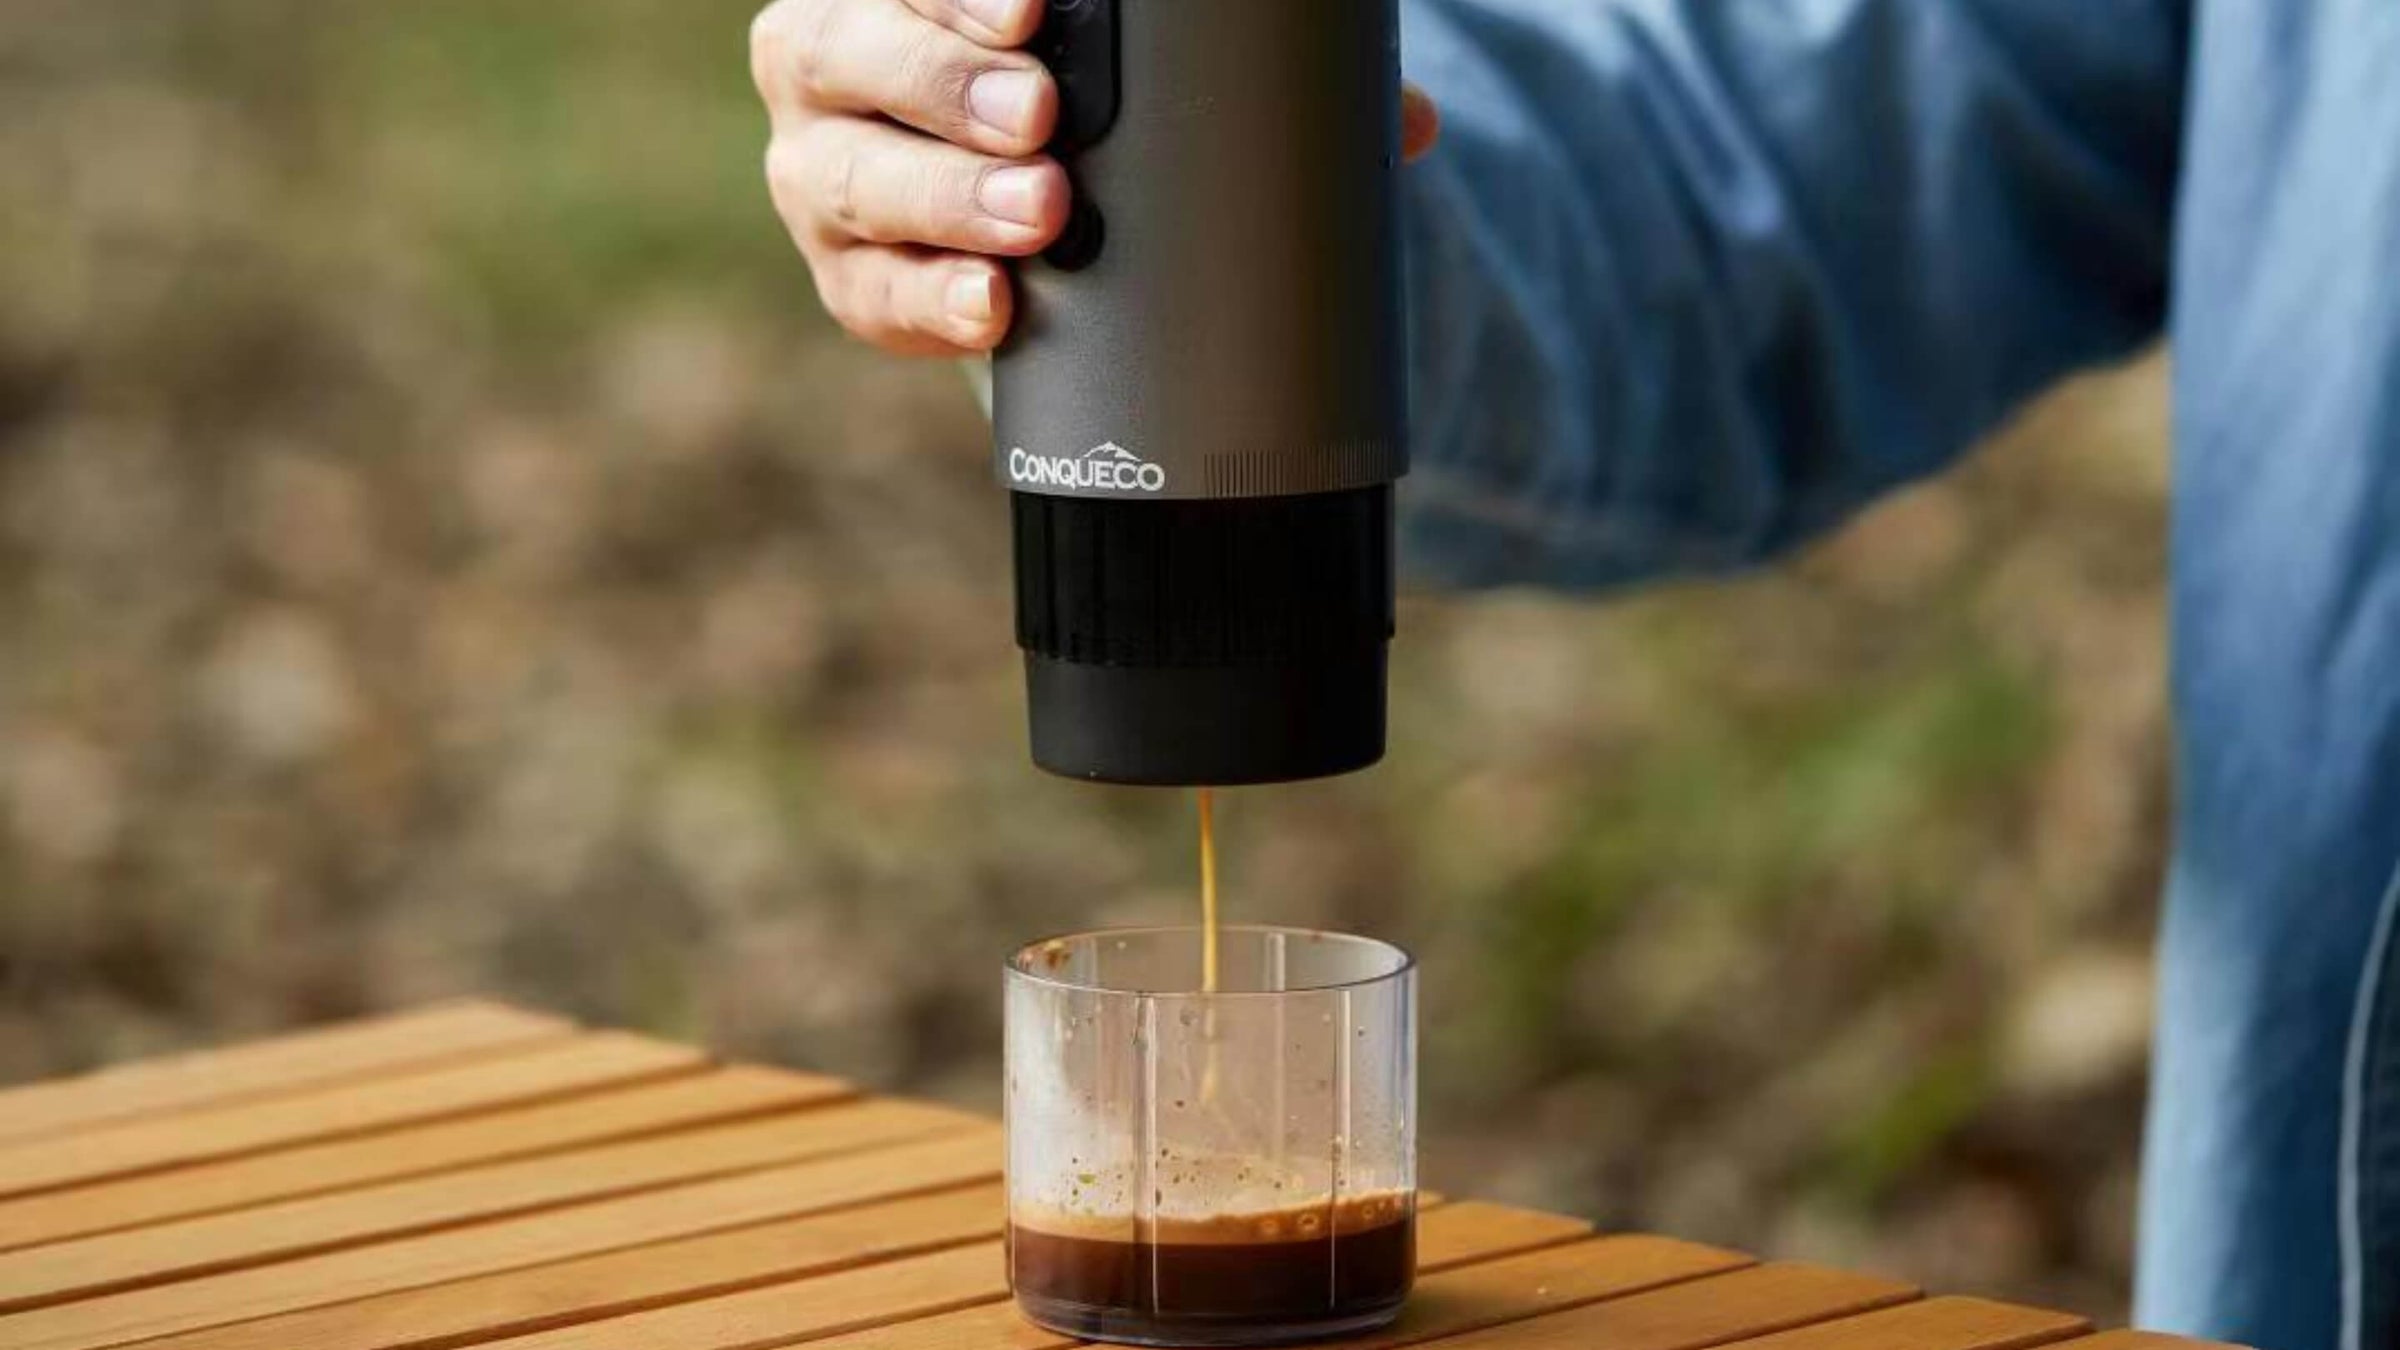 This travel coffee maker works with ground coffee and coffee capsules (Illy, Lavazza, Kimbo, Cafe Royal, L'OR, Jacobs, and Nespresso).